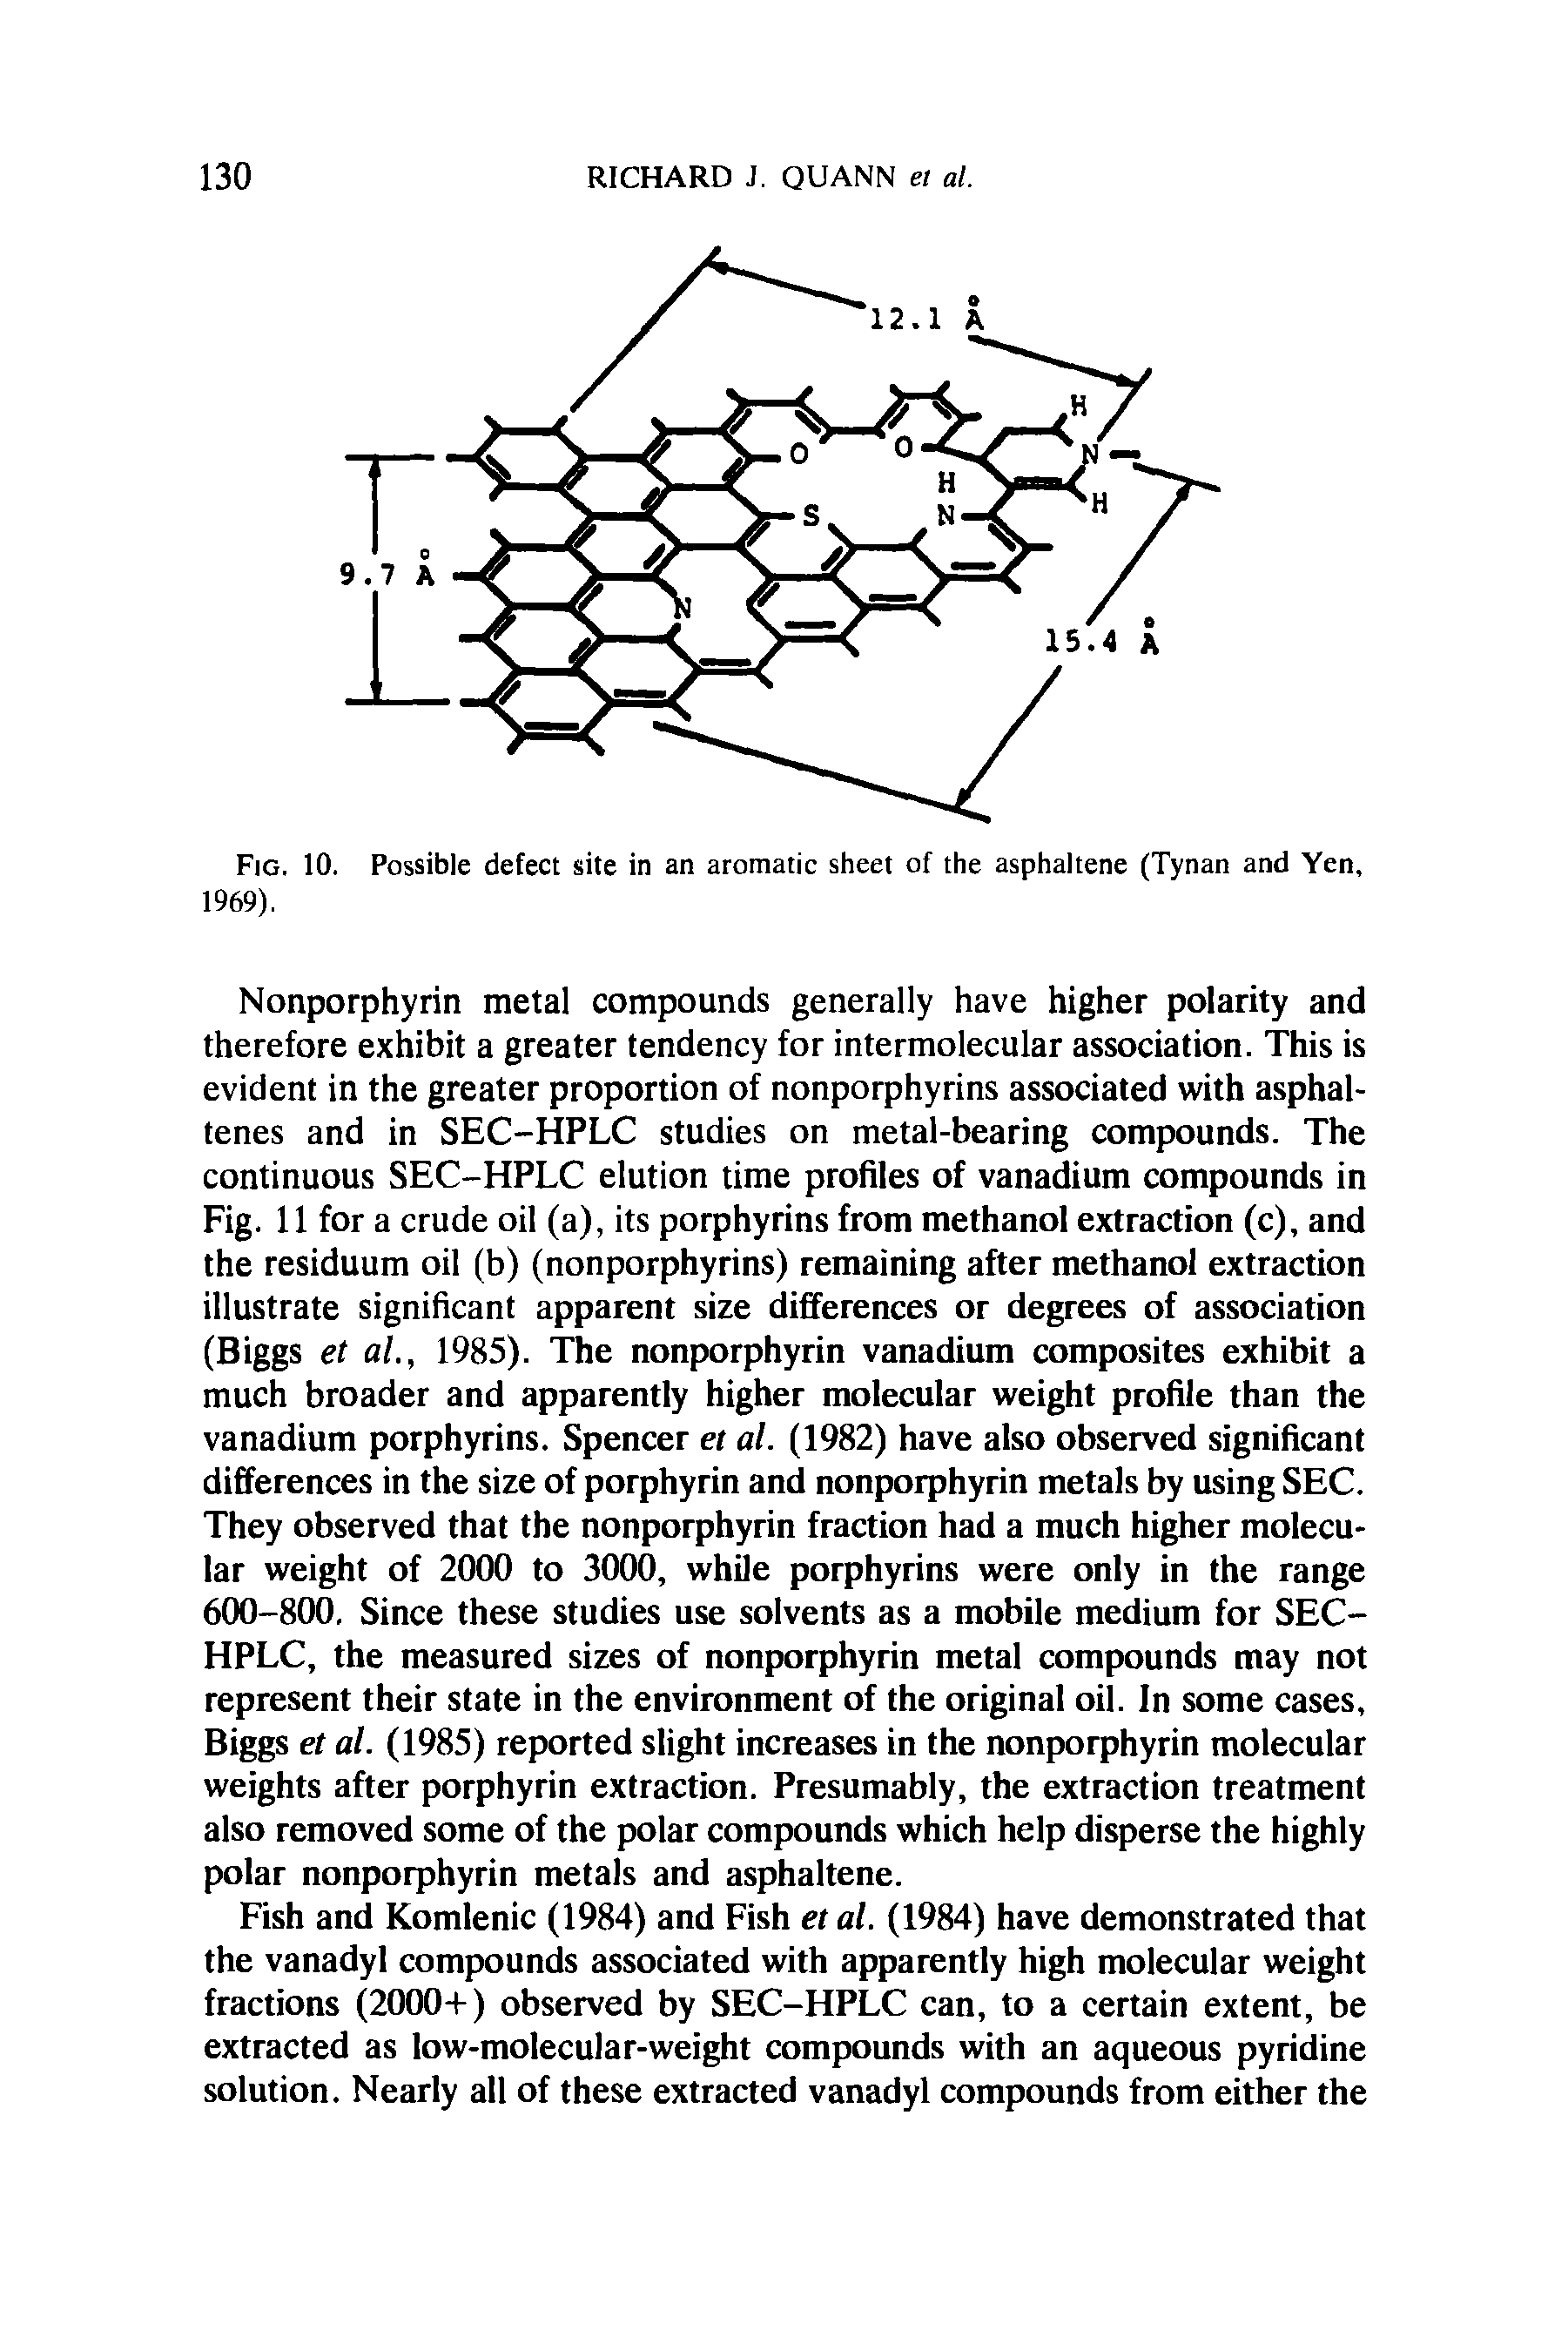 Fig. 10. Possible defect site in an aromatic sheet of the asphaltene (Tynan and Yen, 1969).